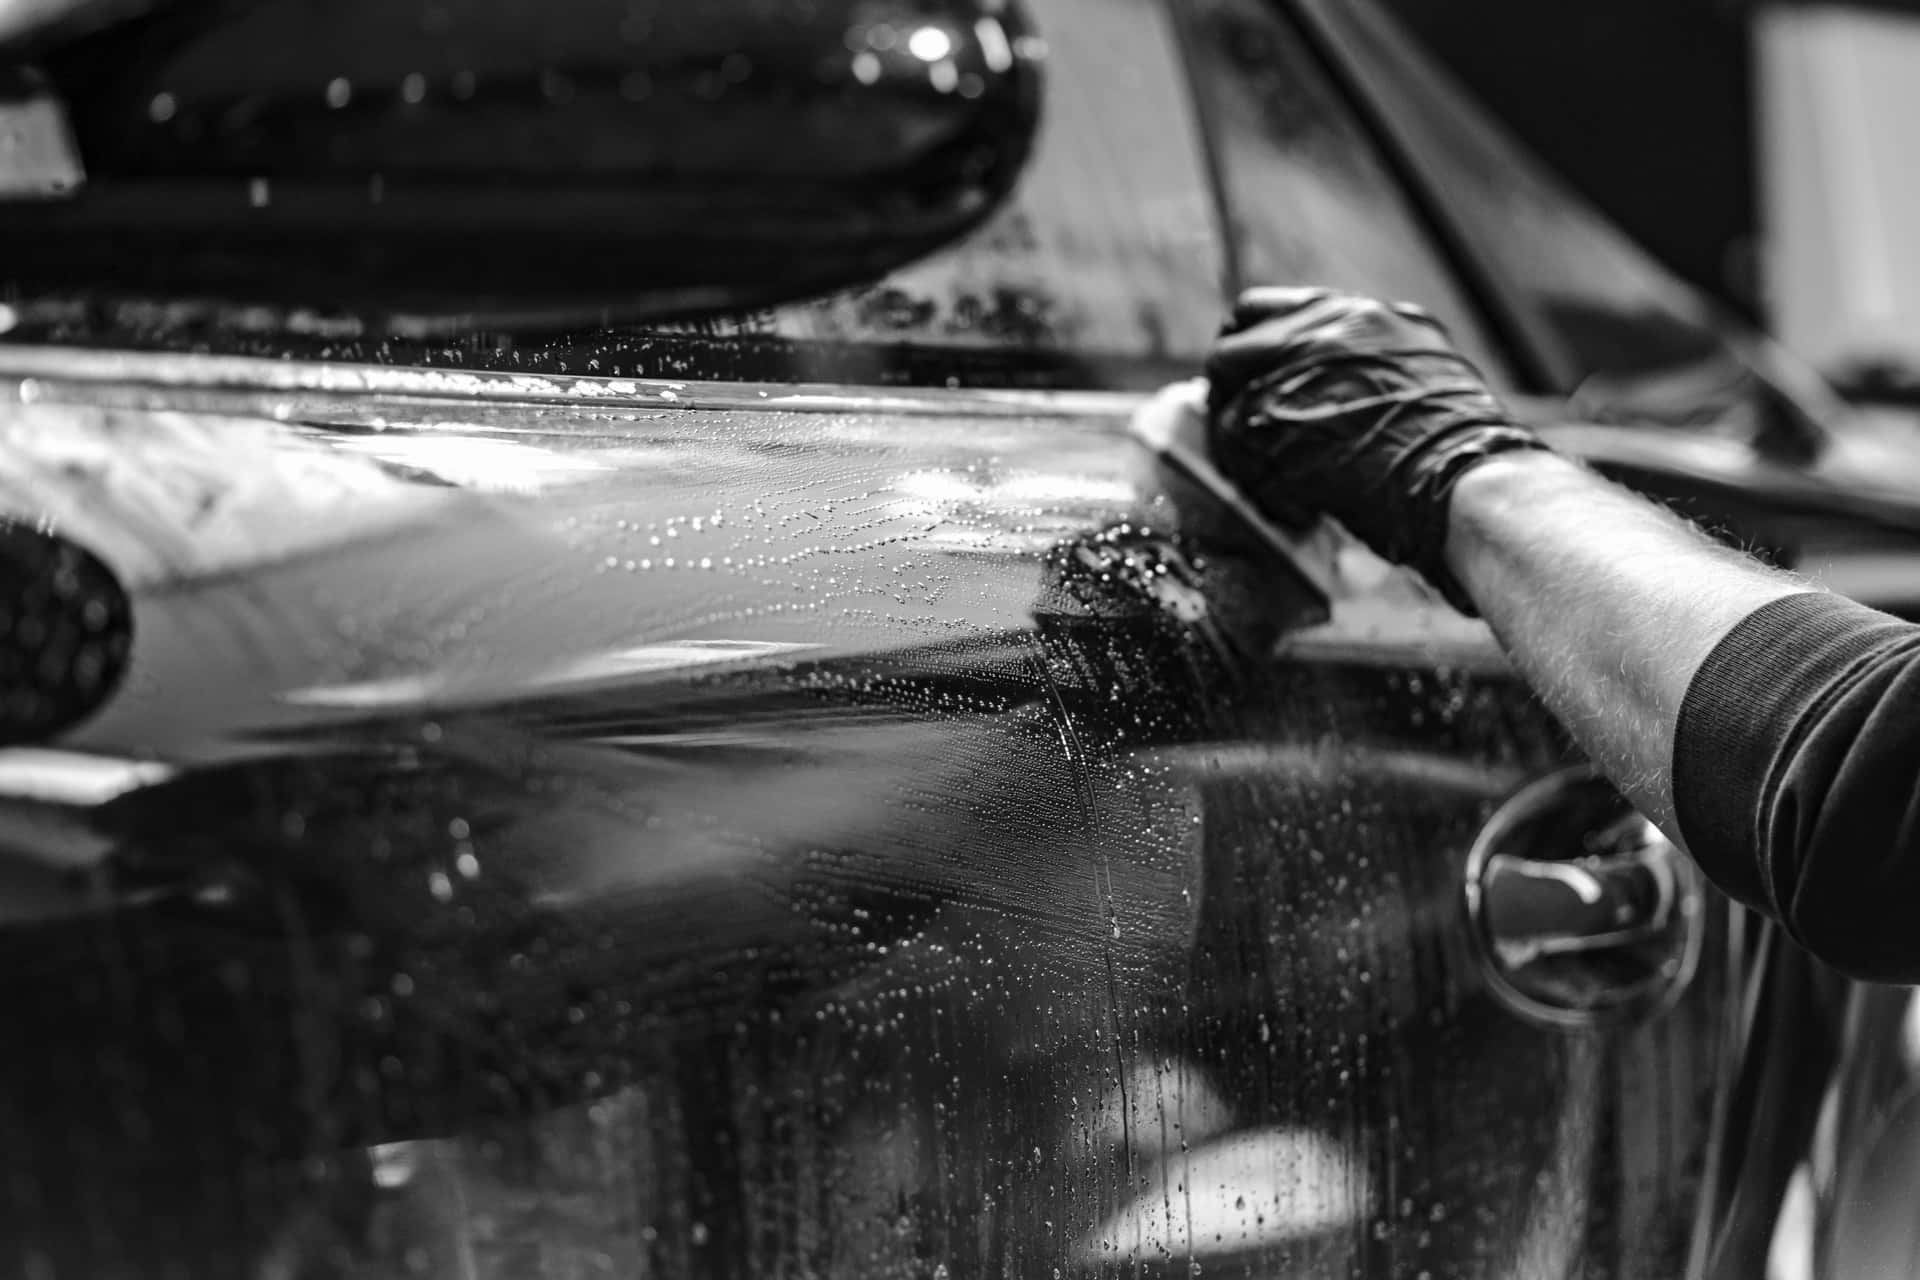 Have your wheels in tip-top shape and get that clean car wash glimmer from Car Wash today!